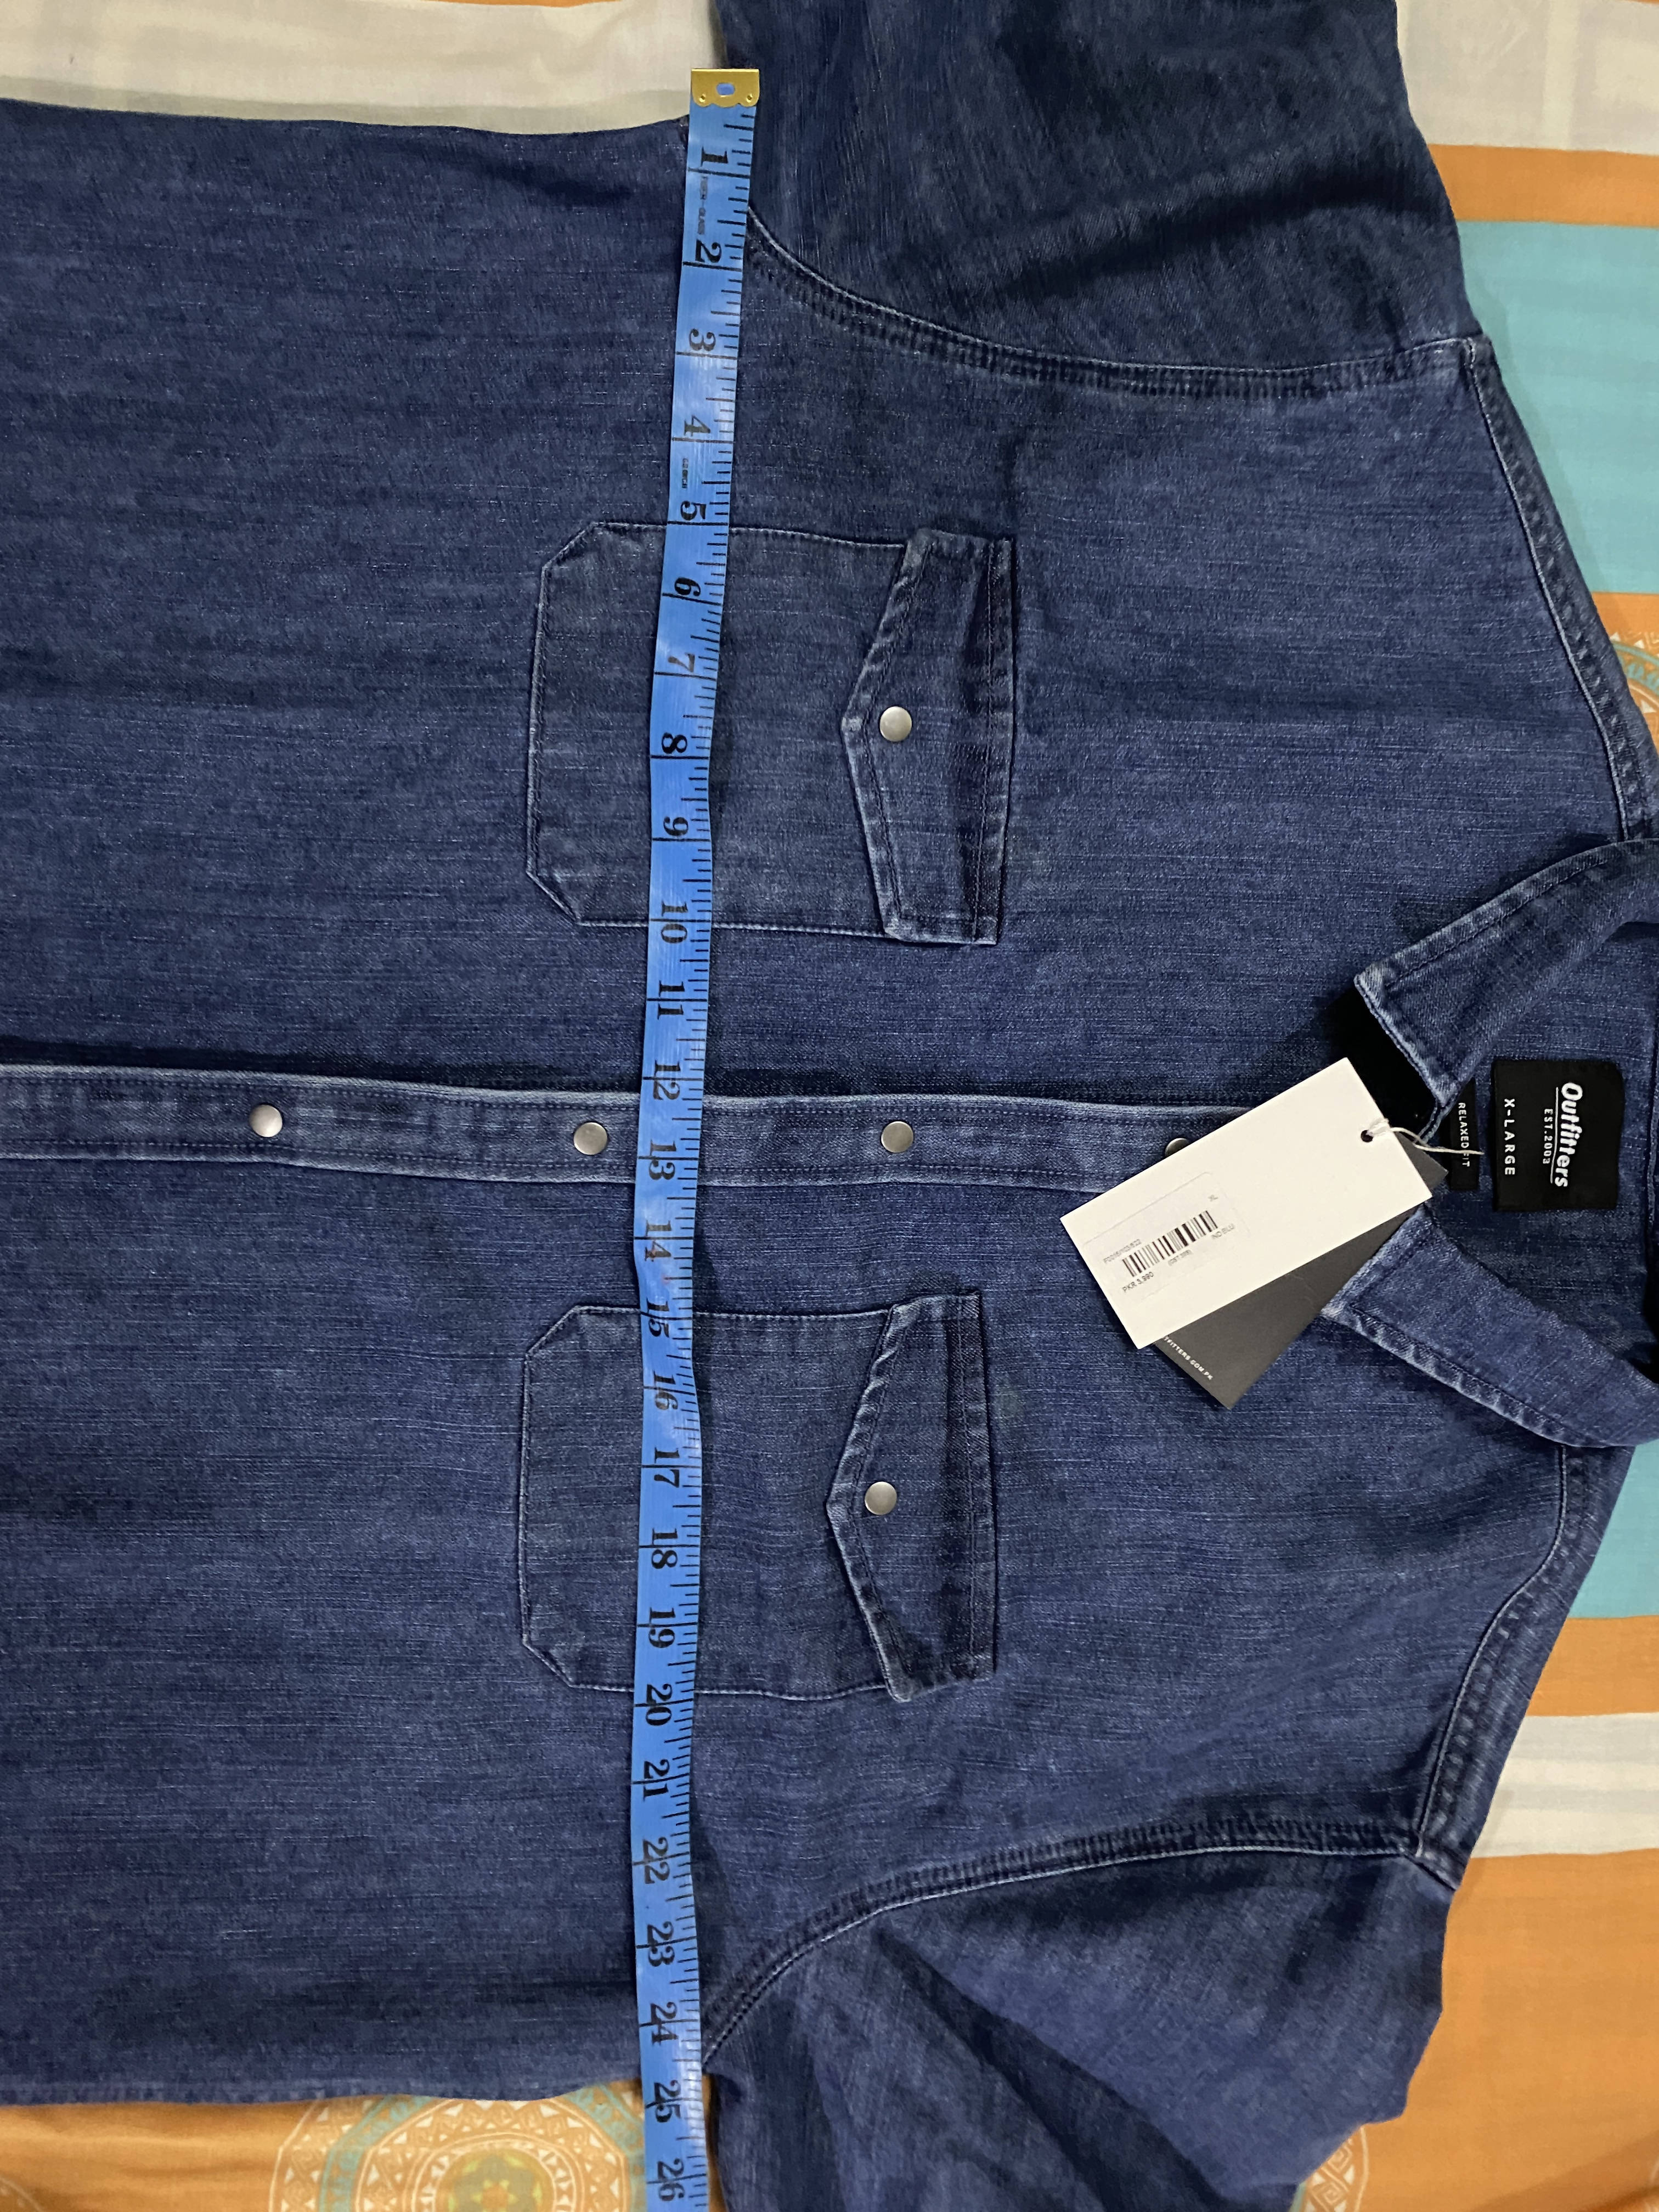 Outfitters | Blue Denim Jacket | Men Tops & Shirts | Brand New